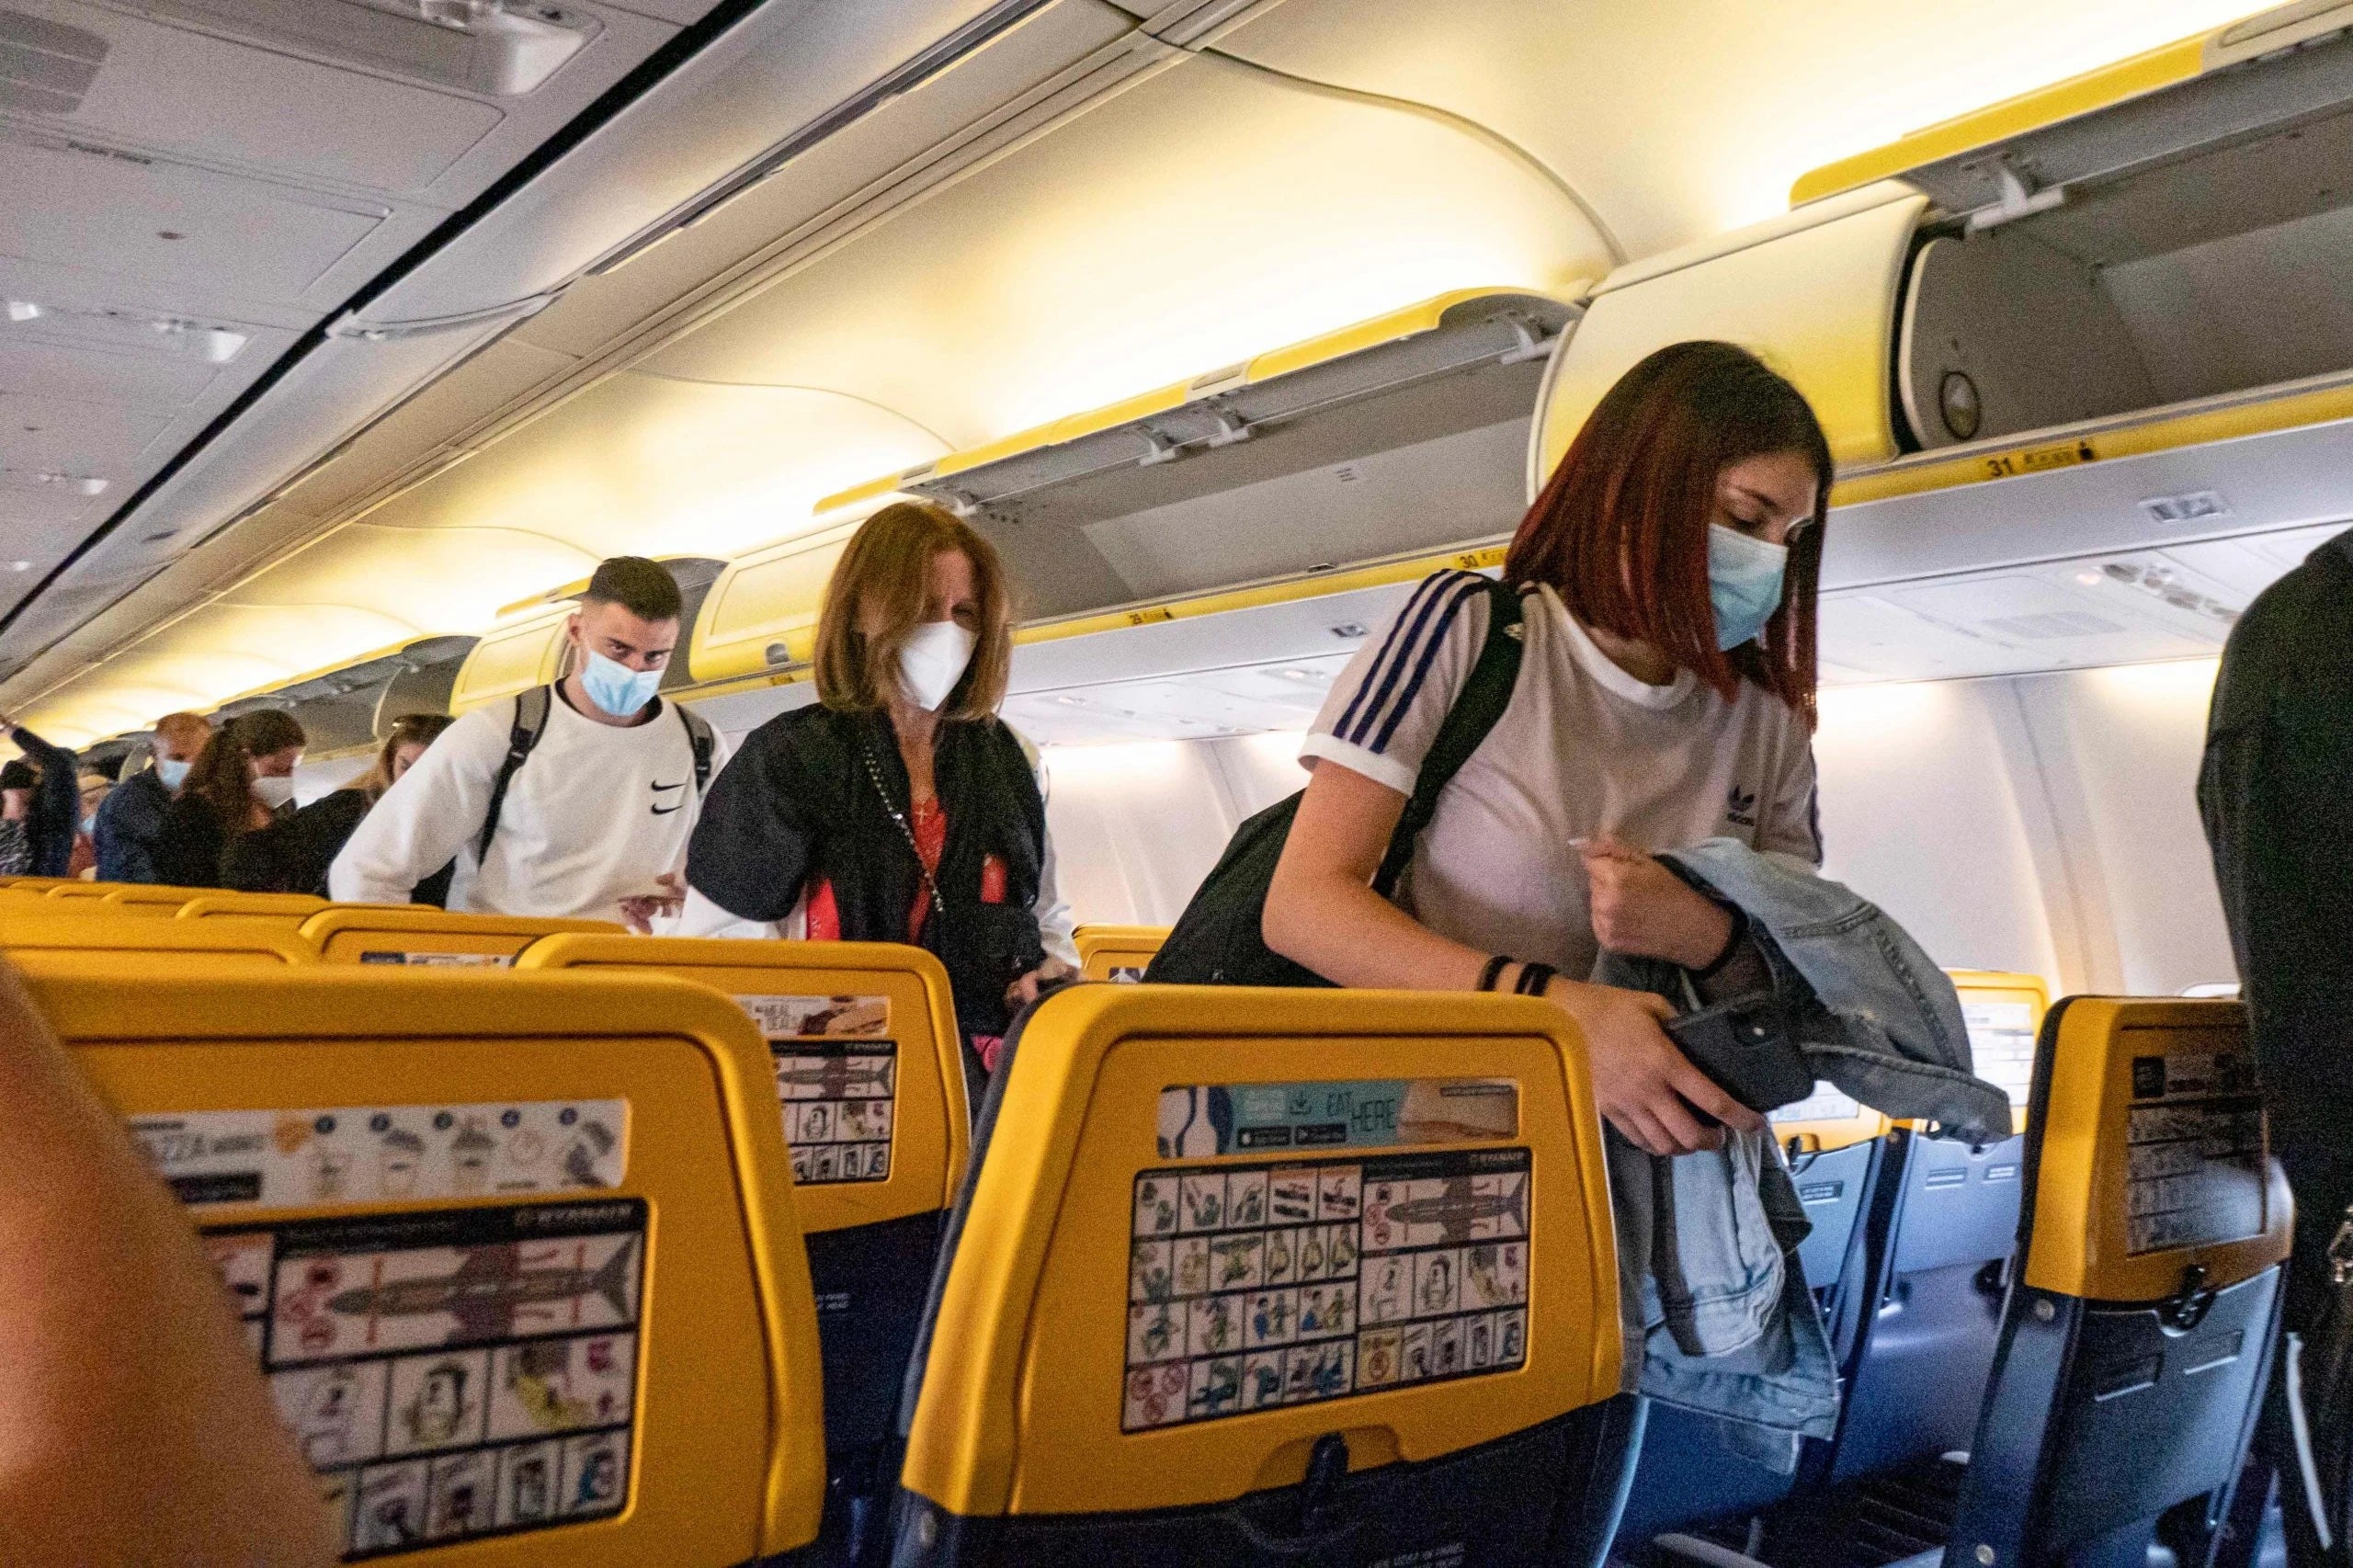 The 13 European countries that still require masks on flights despite EU dropping rules